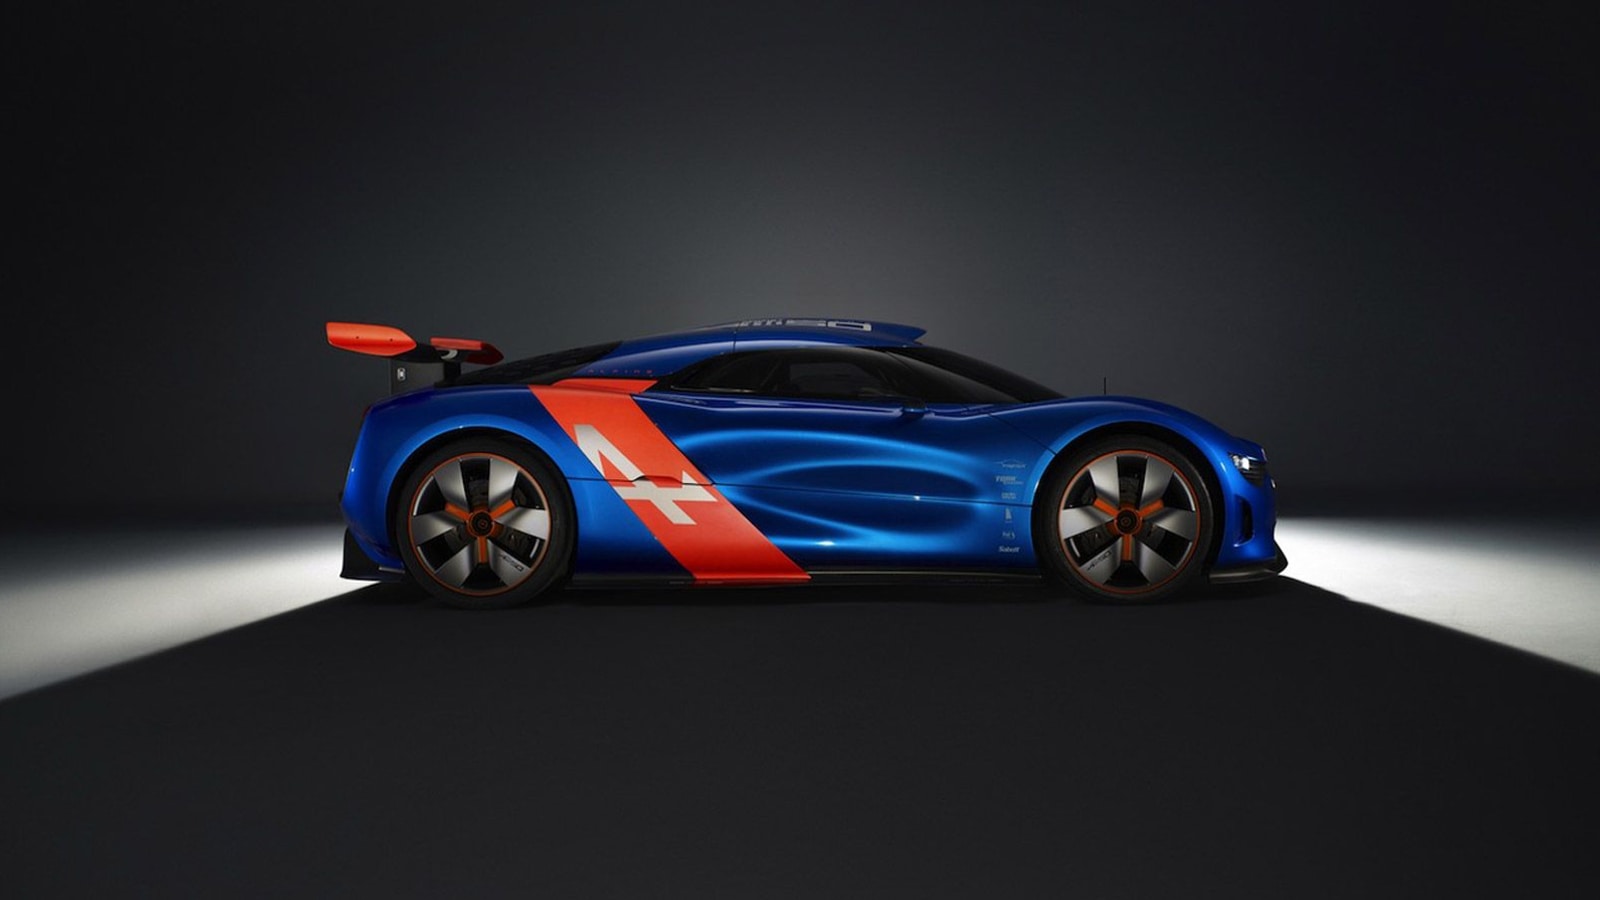 Renault Alpine A110-50 Concept Headed To 2012 Festival of